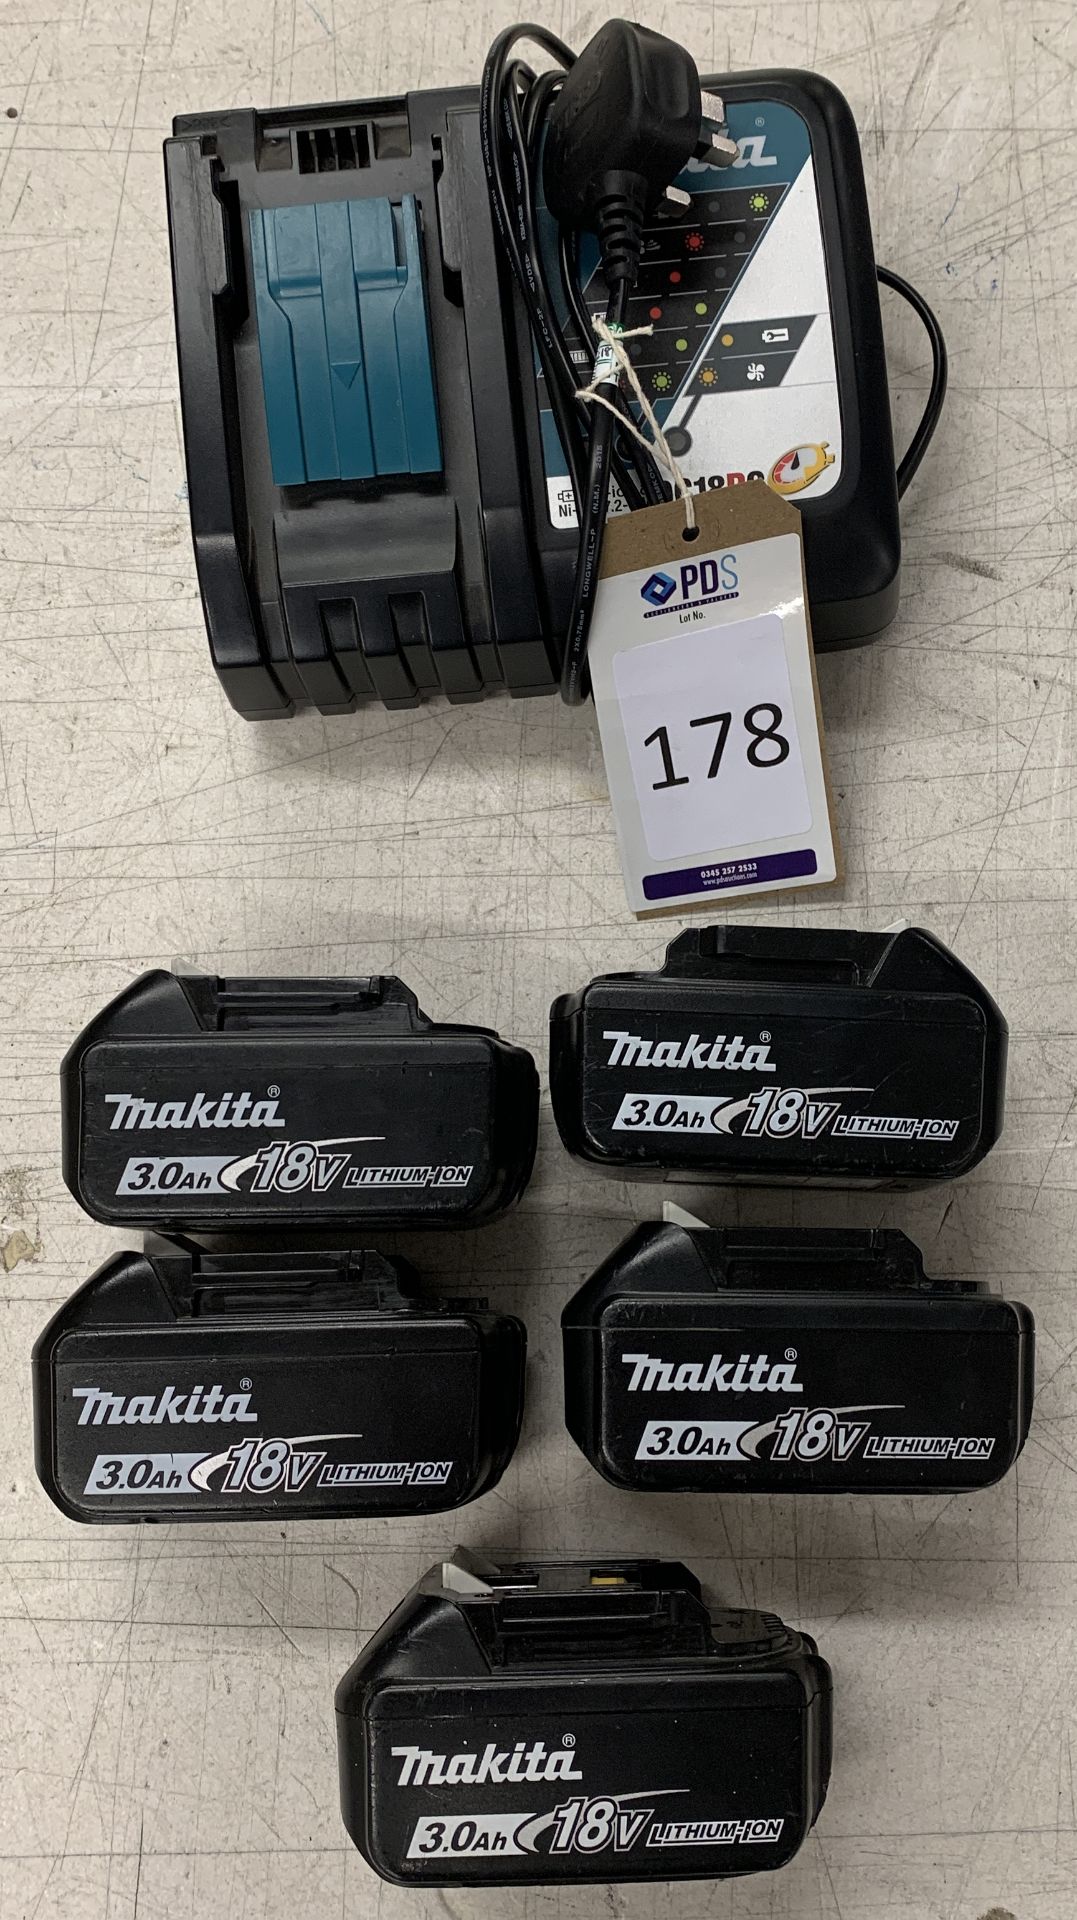 Makita Dc18rc Charger & Five Makita 3.0ah Batteries (Located Norwich – See General Notes for Viewing